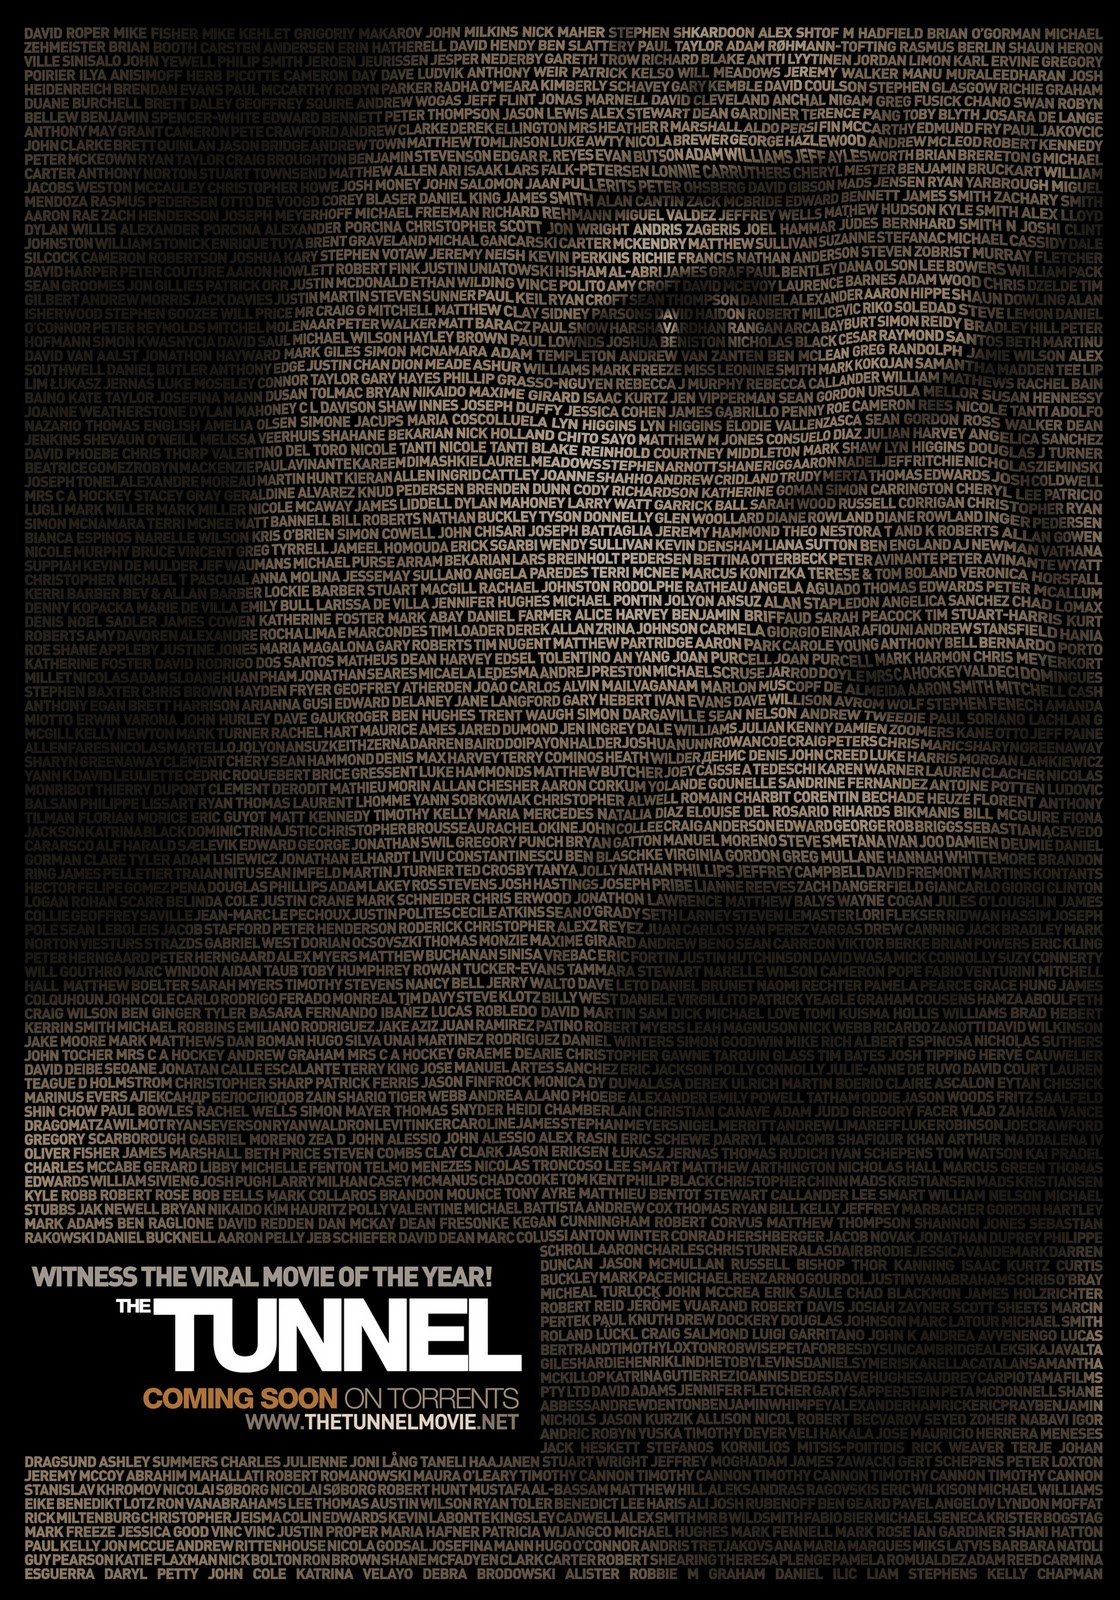 The Tunnel movie